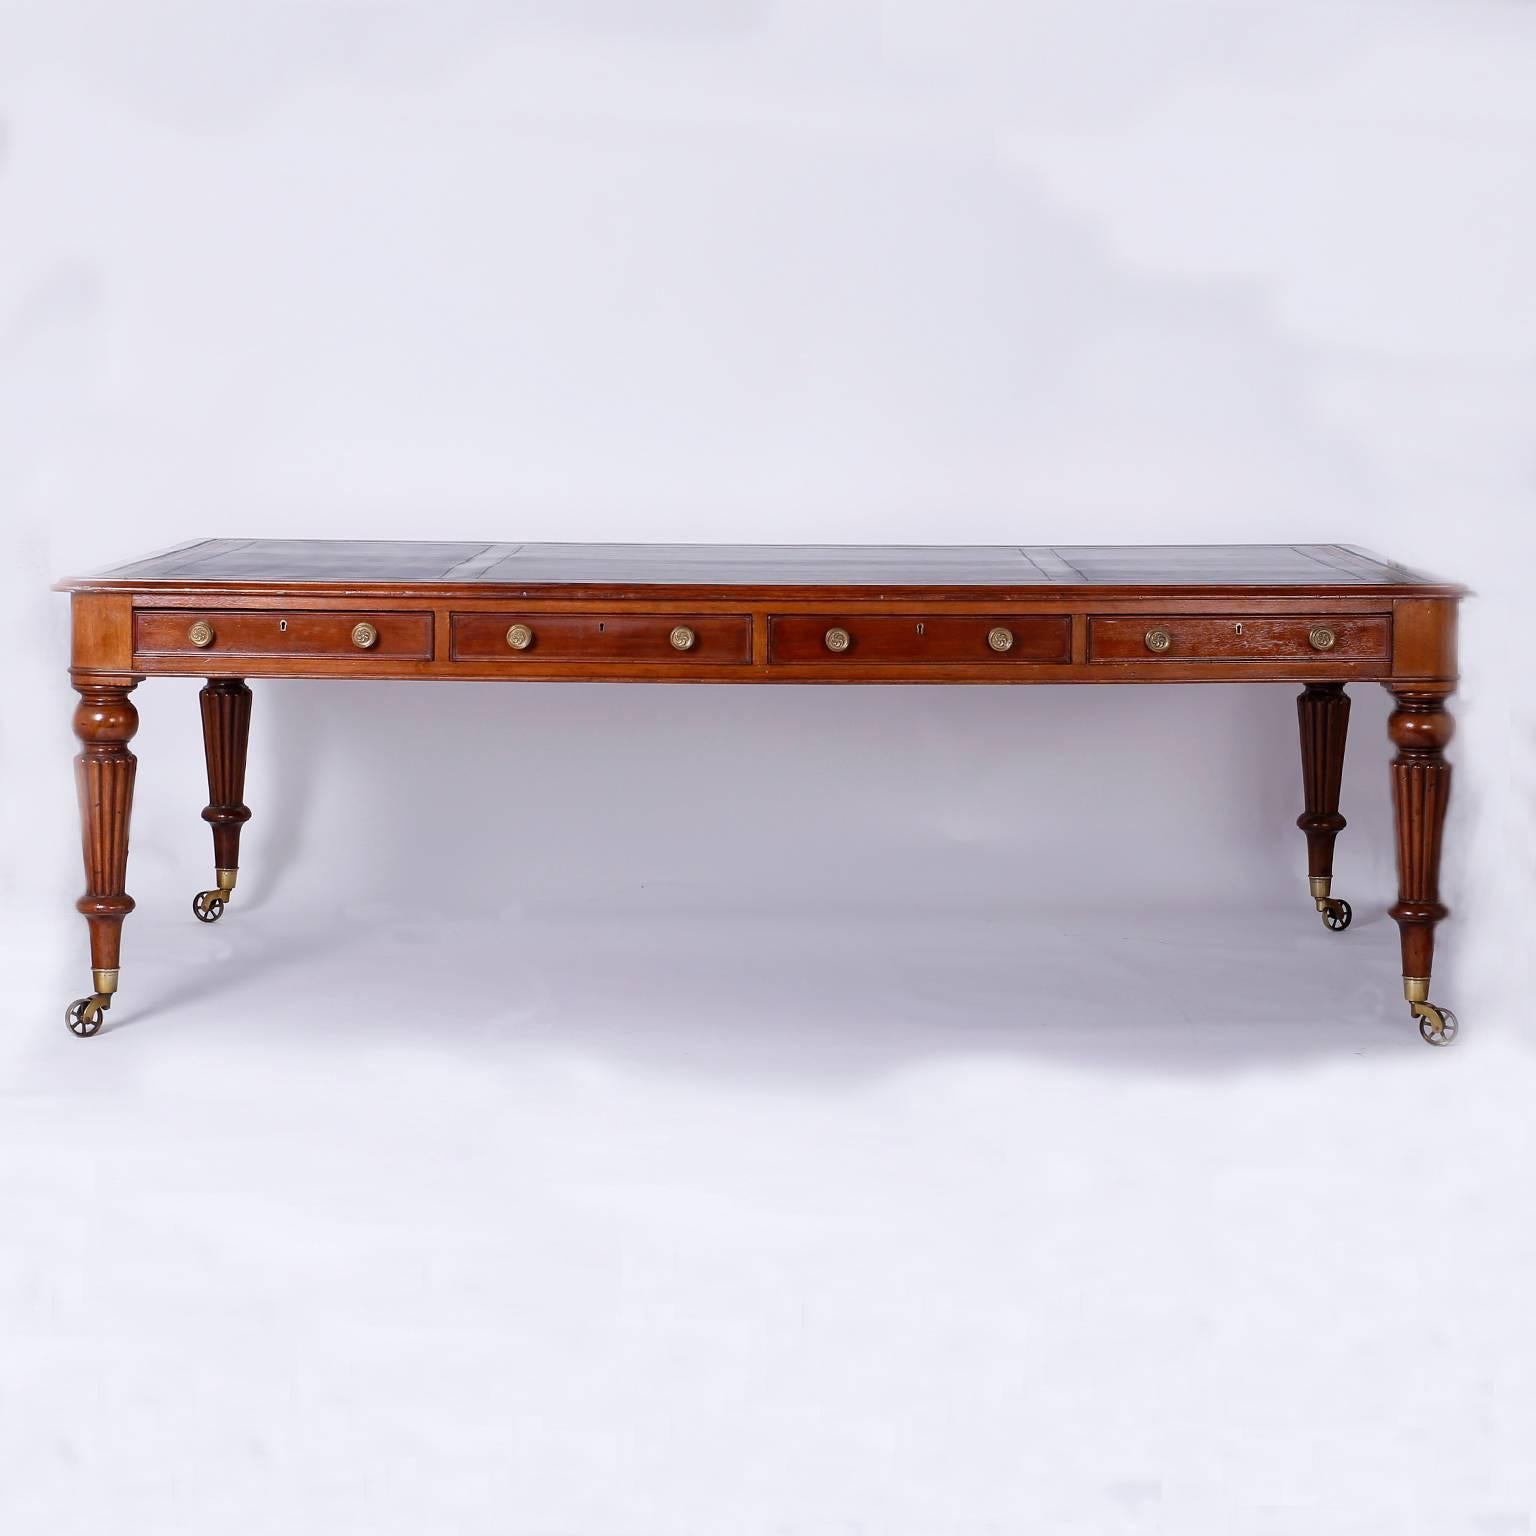 Stately, antique English mahogany partners desk or library table having a lush dark brown leather top with a gold leaf greek key border. The case has four drawers with brass hardware on either identical side. The legs are lathe turned and have